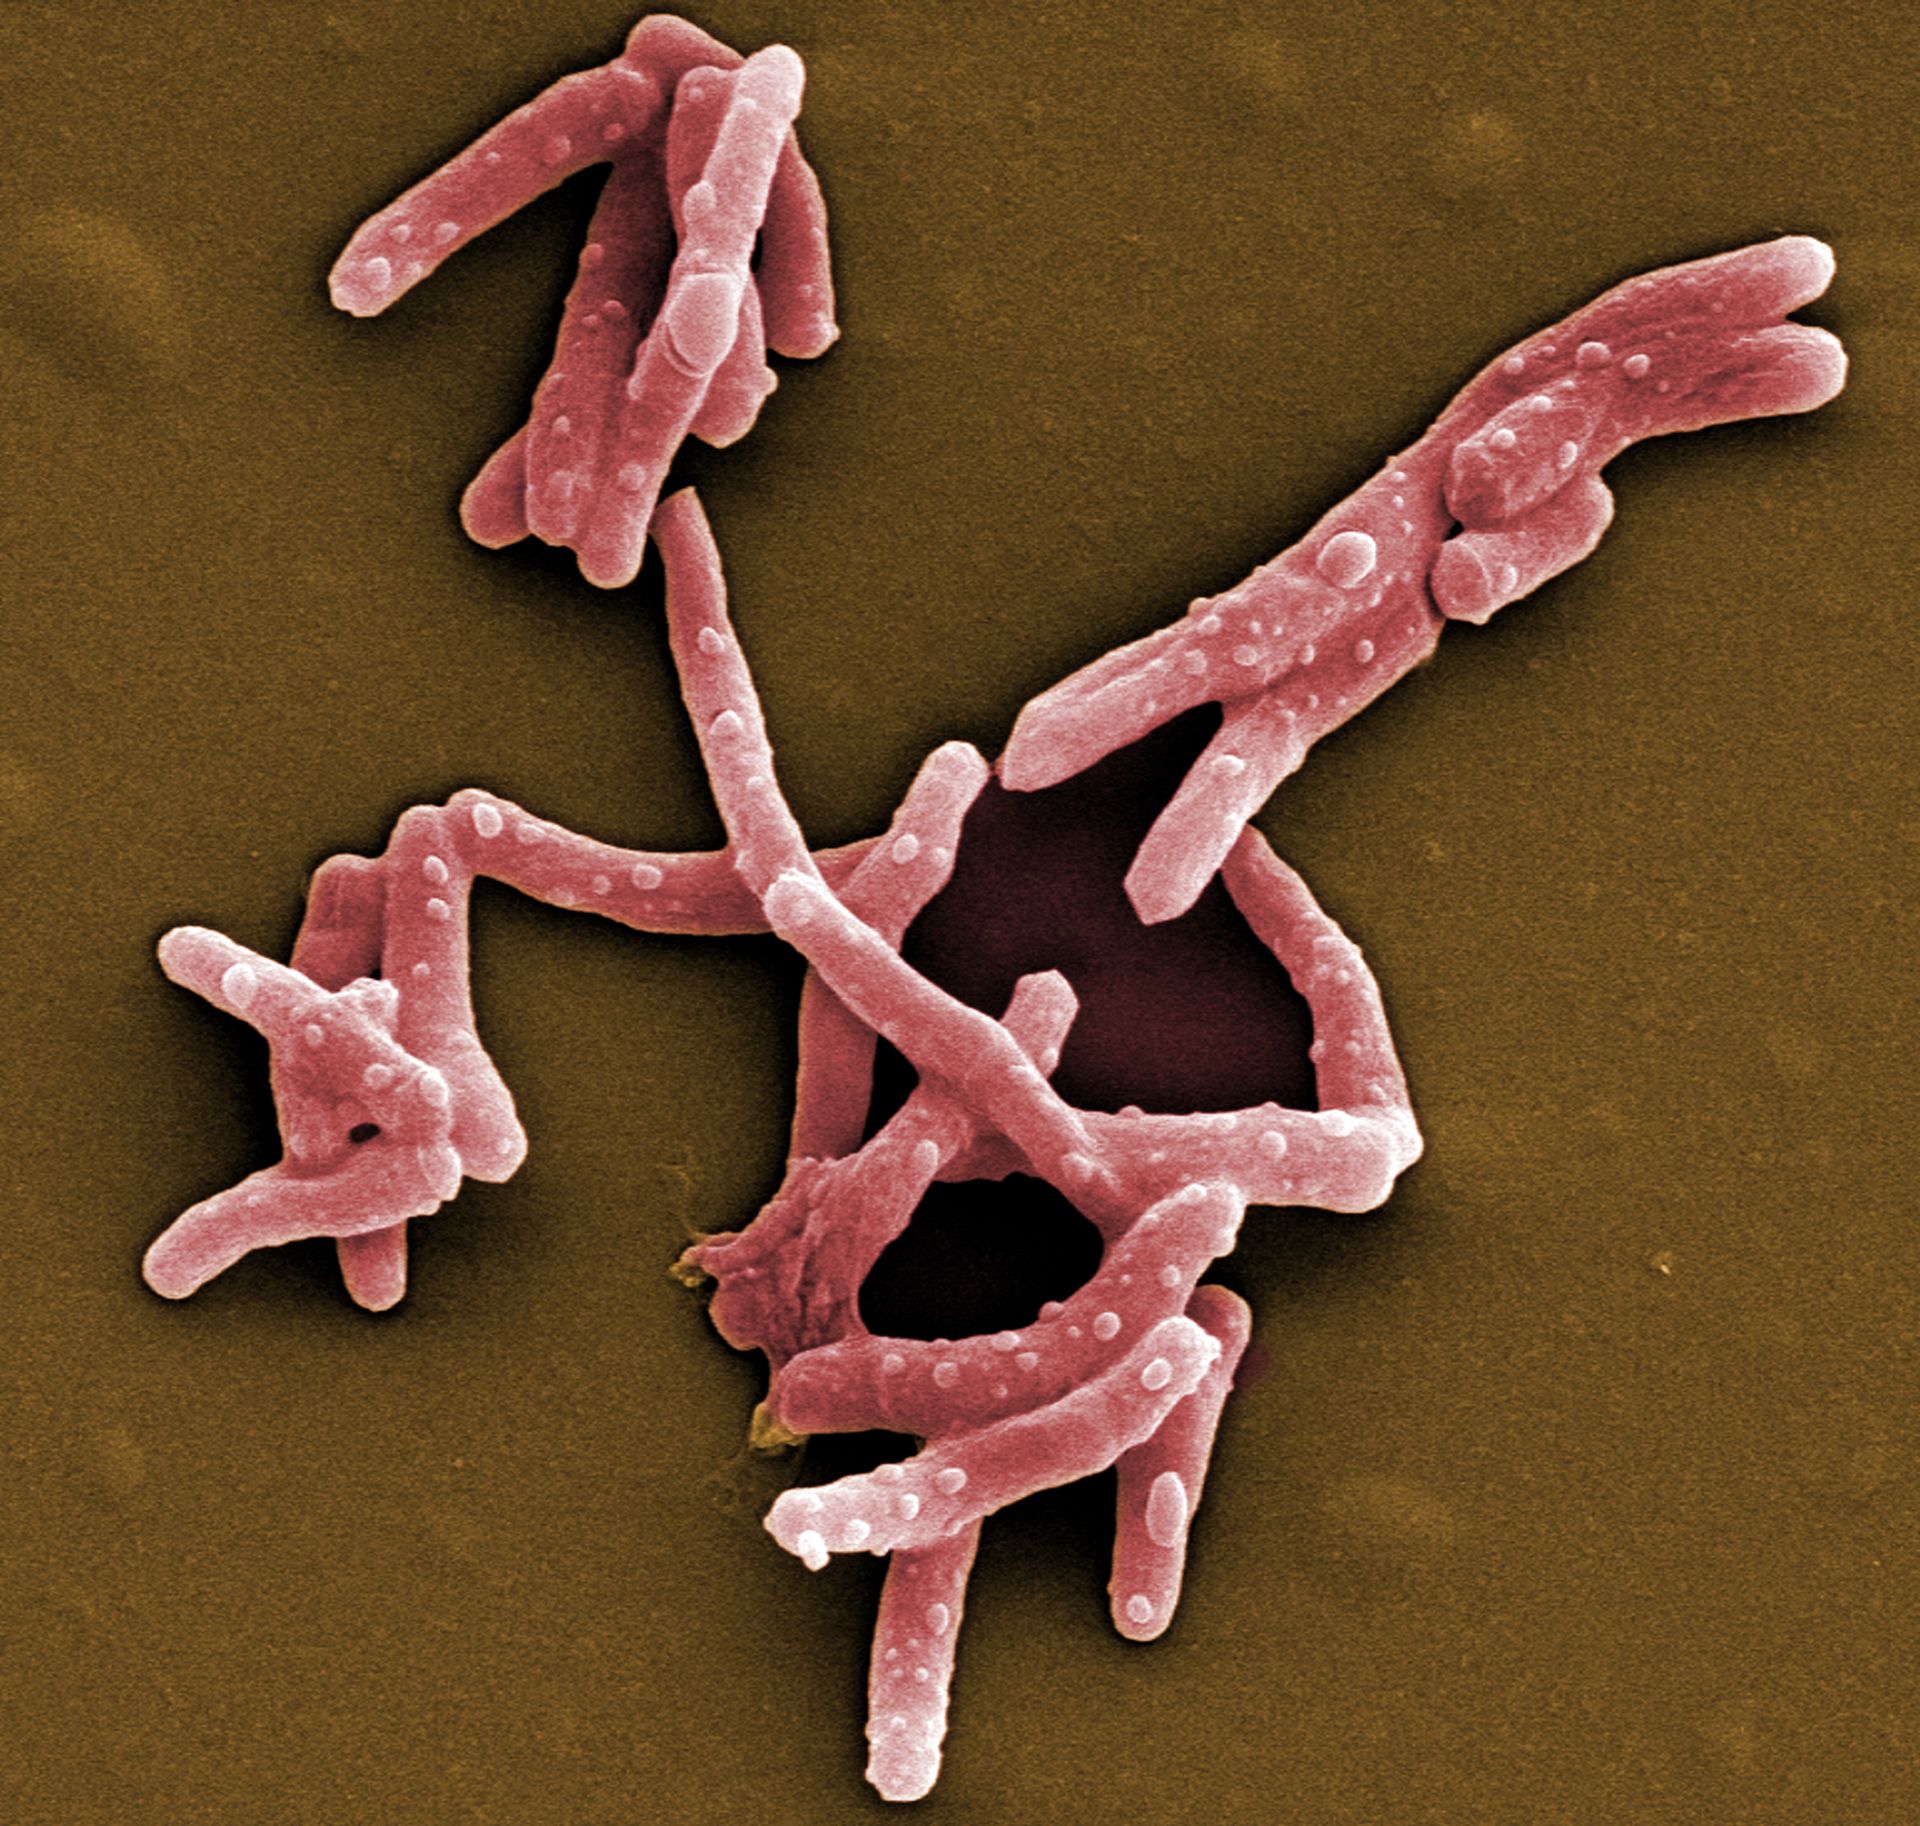 Scanning electron microscope image of Mycobacterium tuberculosis